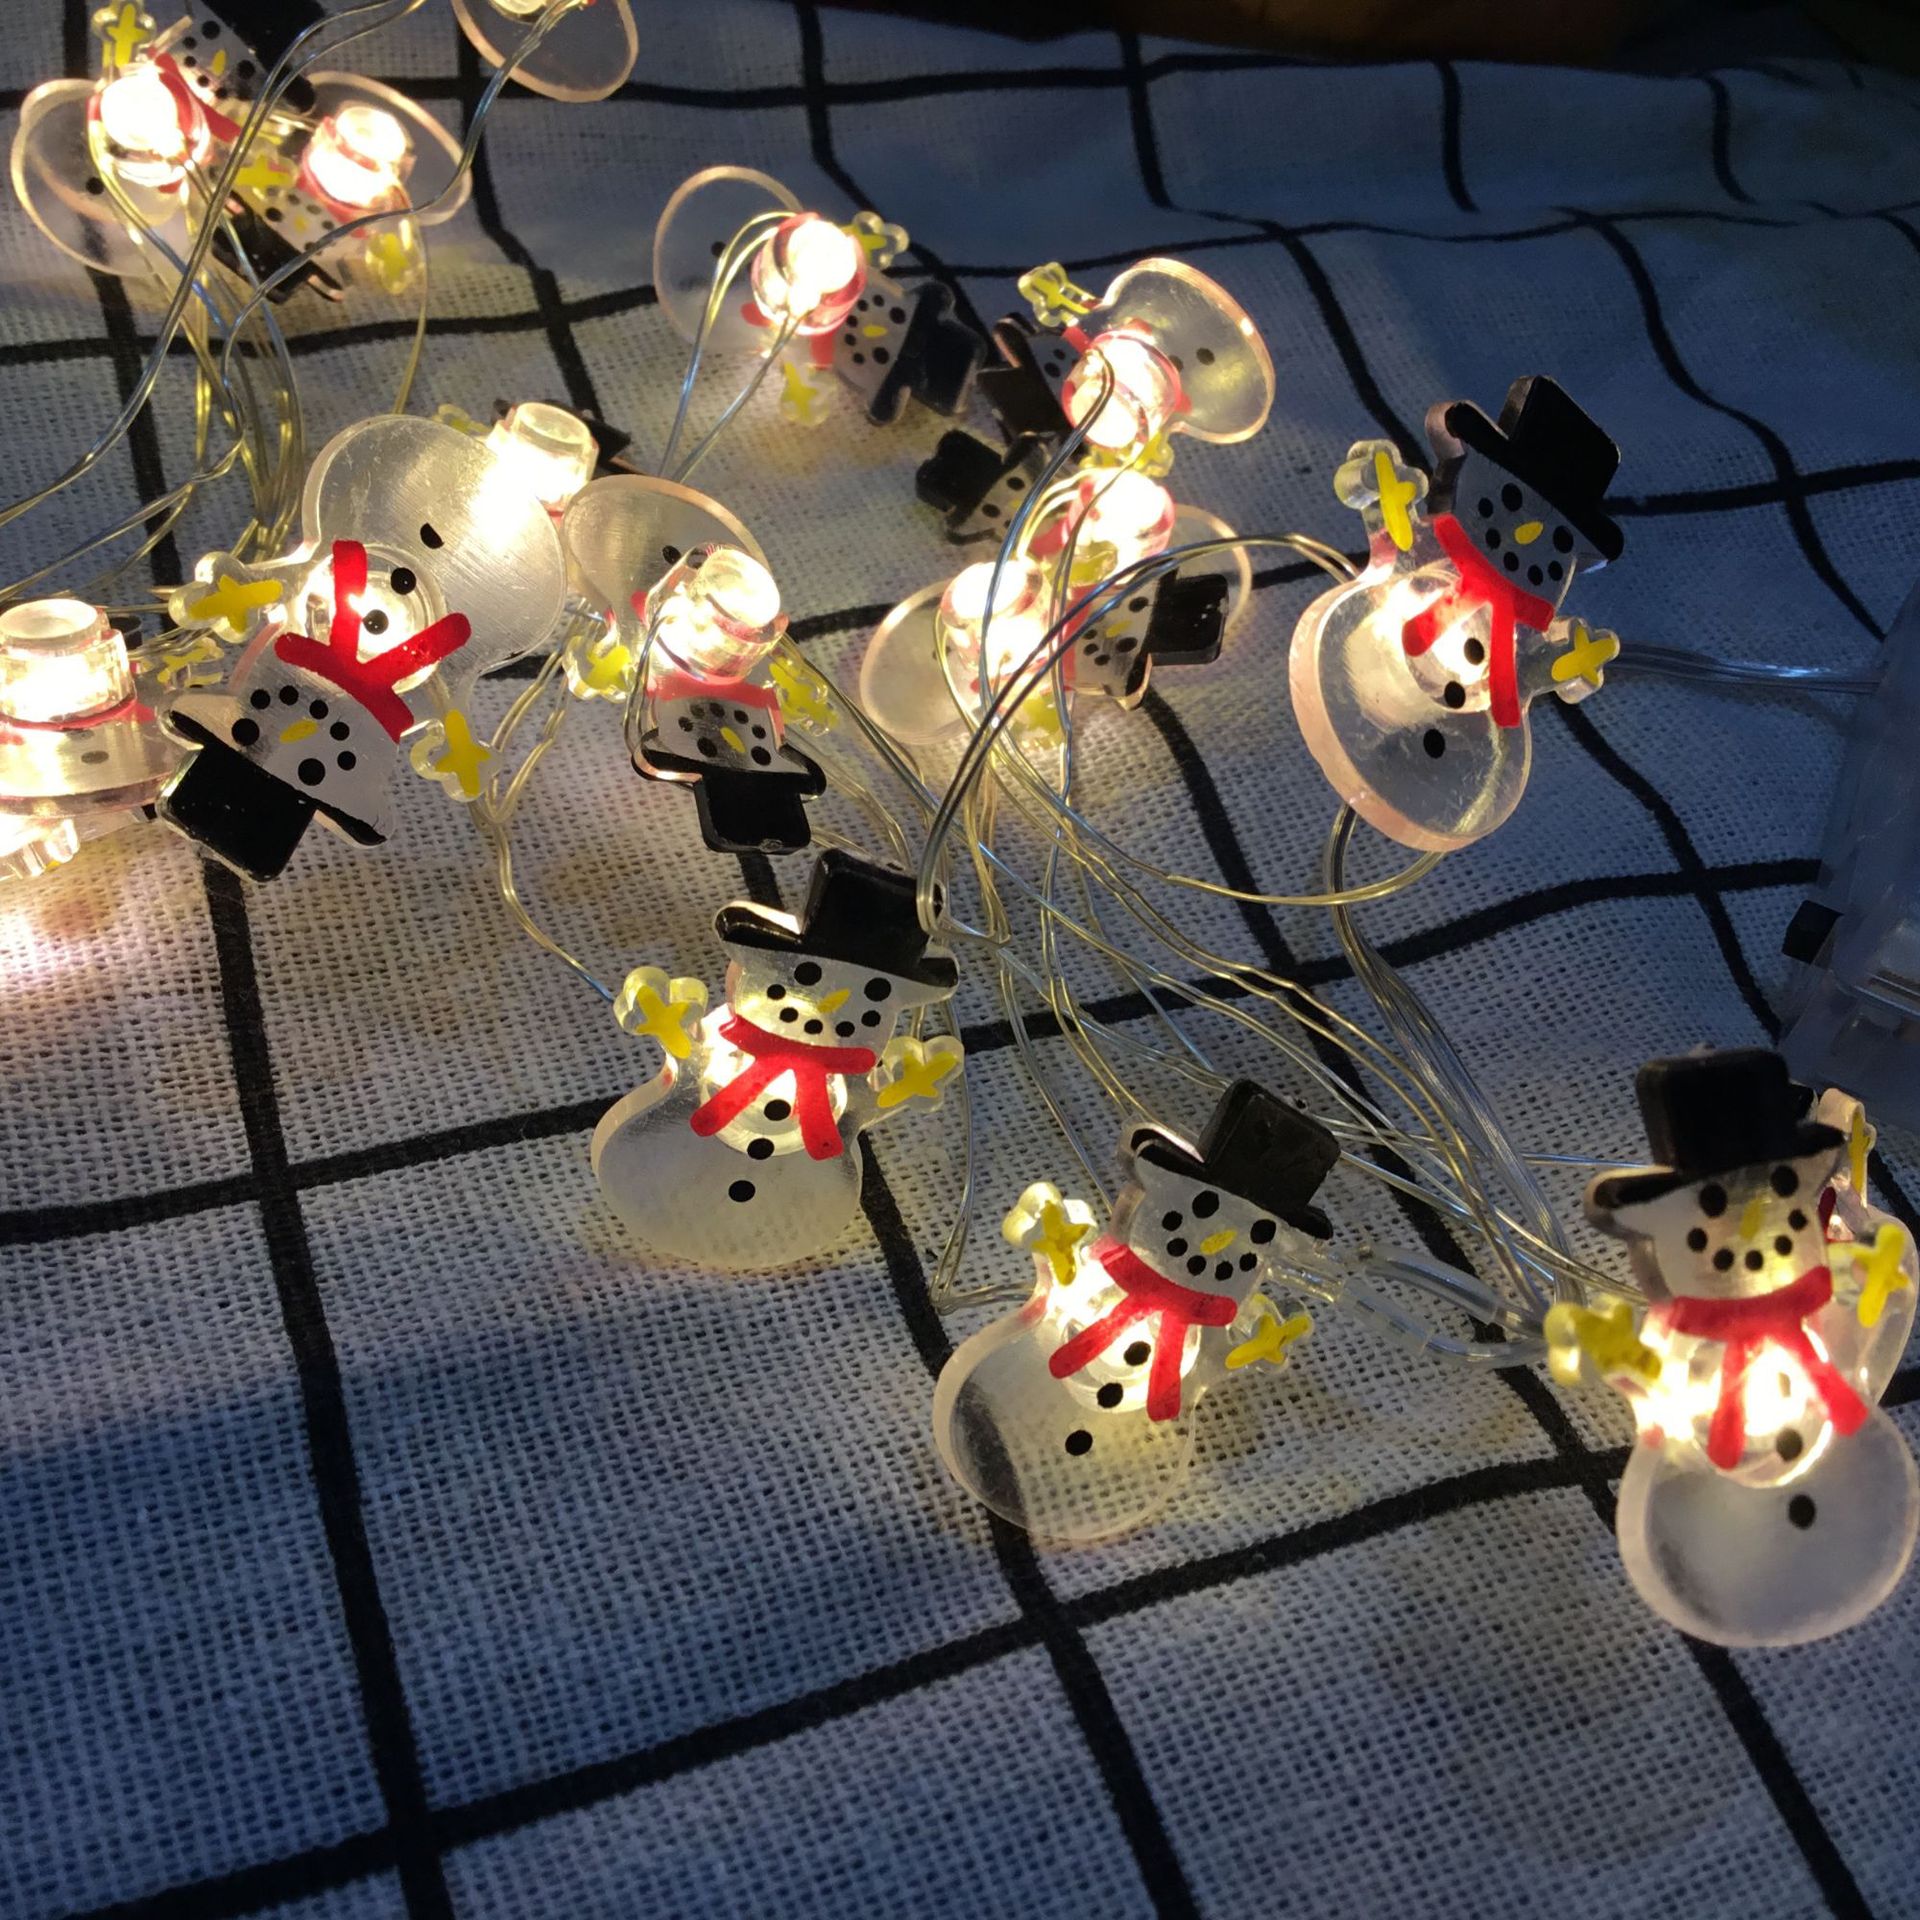 2m-20LED-Black-Hat-Snowman-Pattern-Battery-Powered-Copper-Wire-String-Light-for-Christmas-Holidays-P-1780772-1